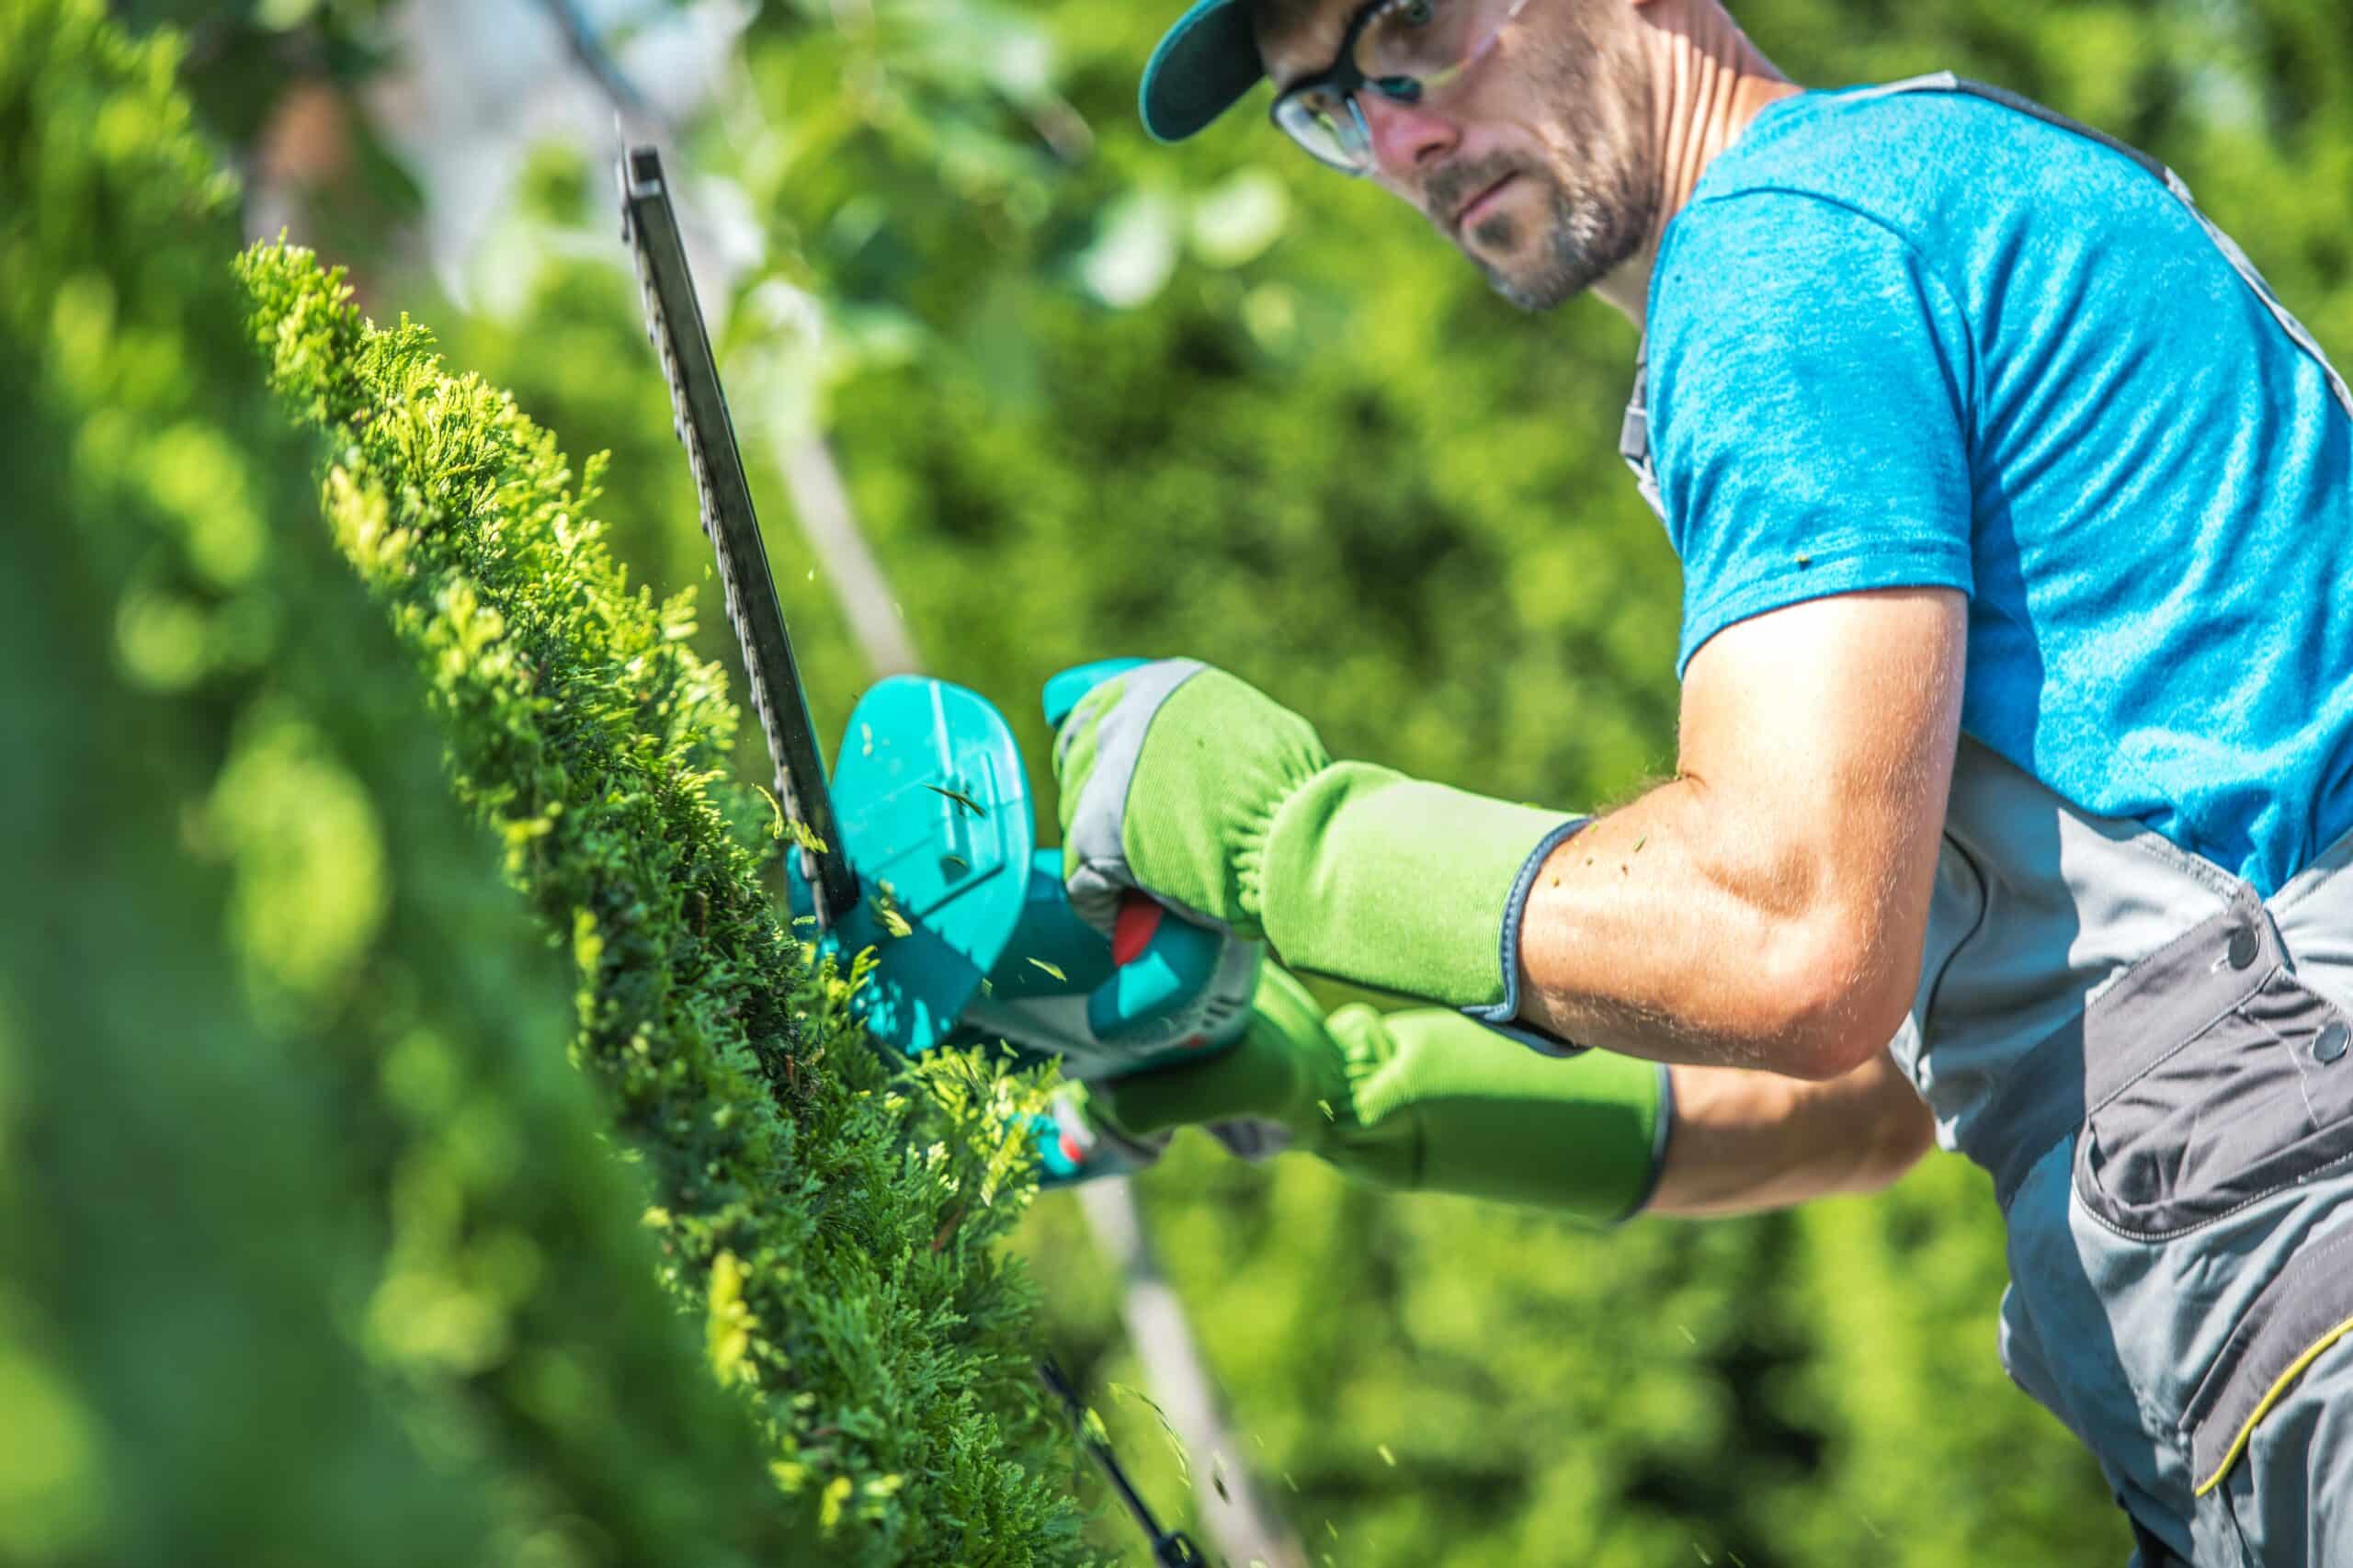 proper shrub and hedge trimming prevents diseases in plants